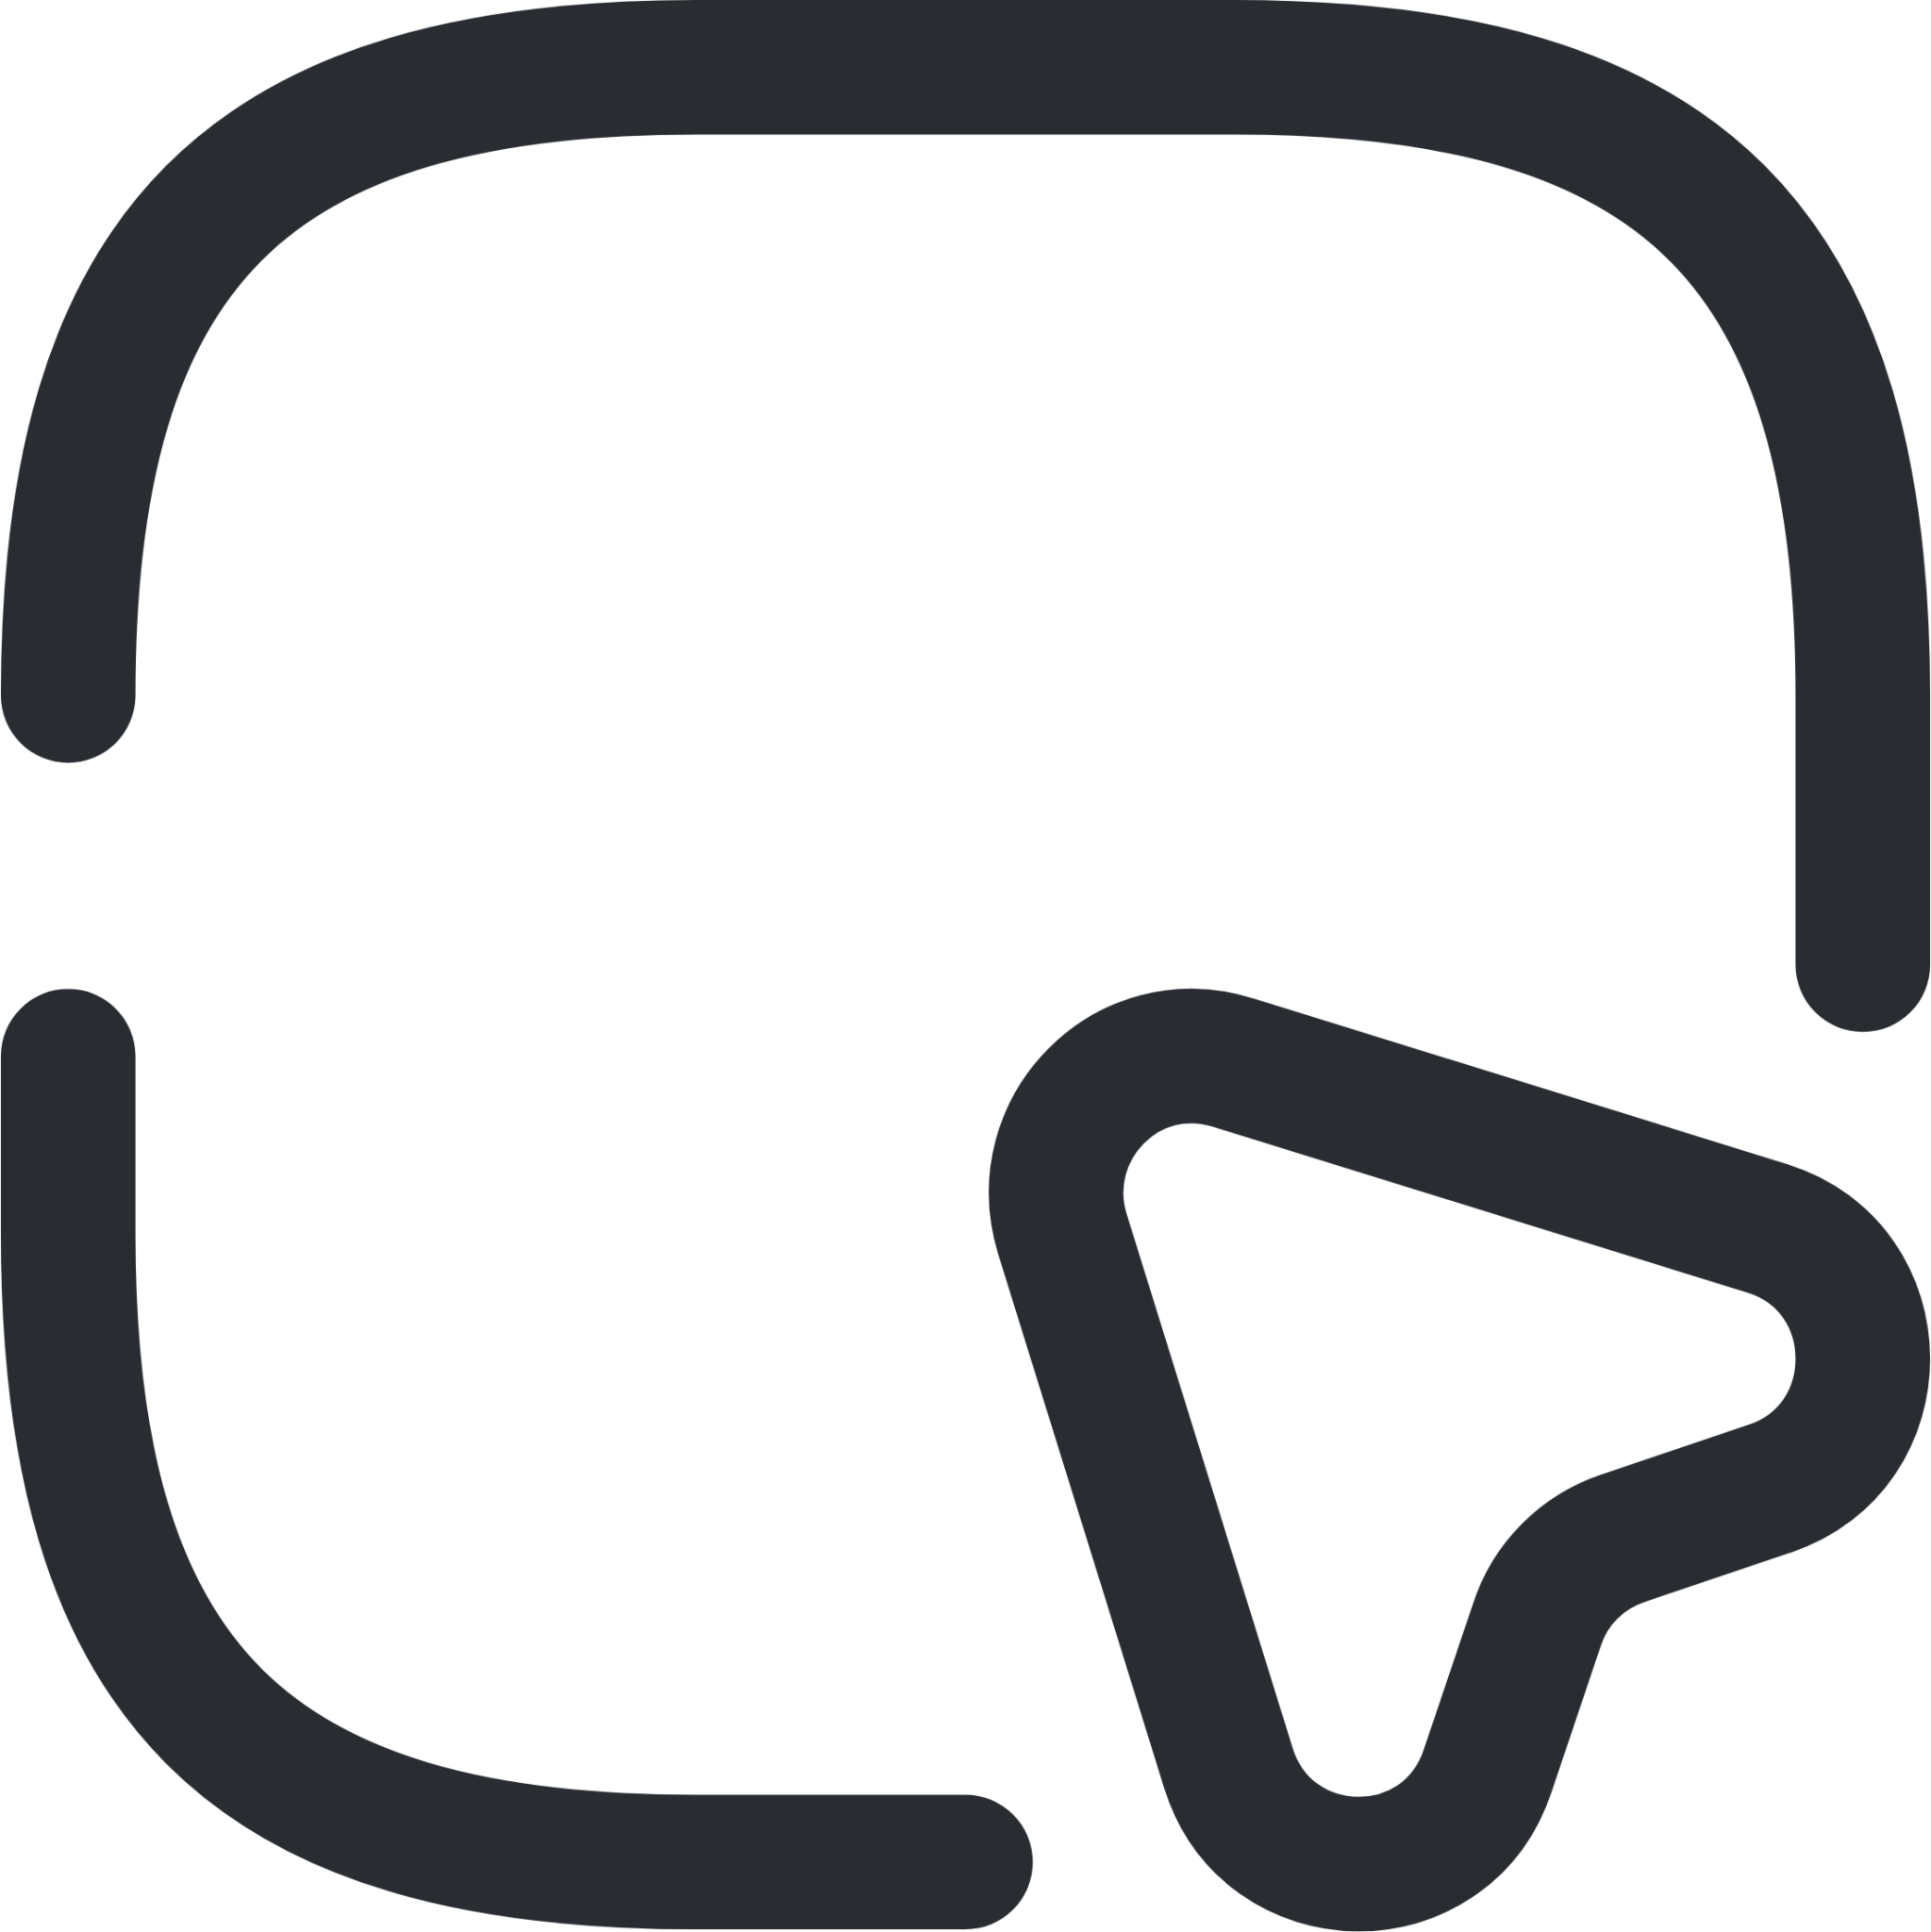 mouse square icon